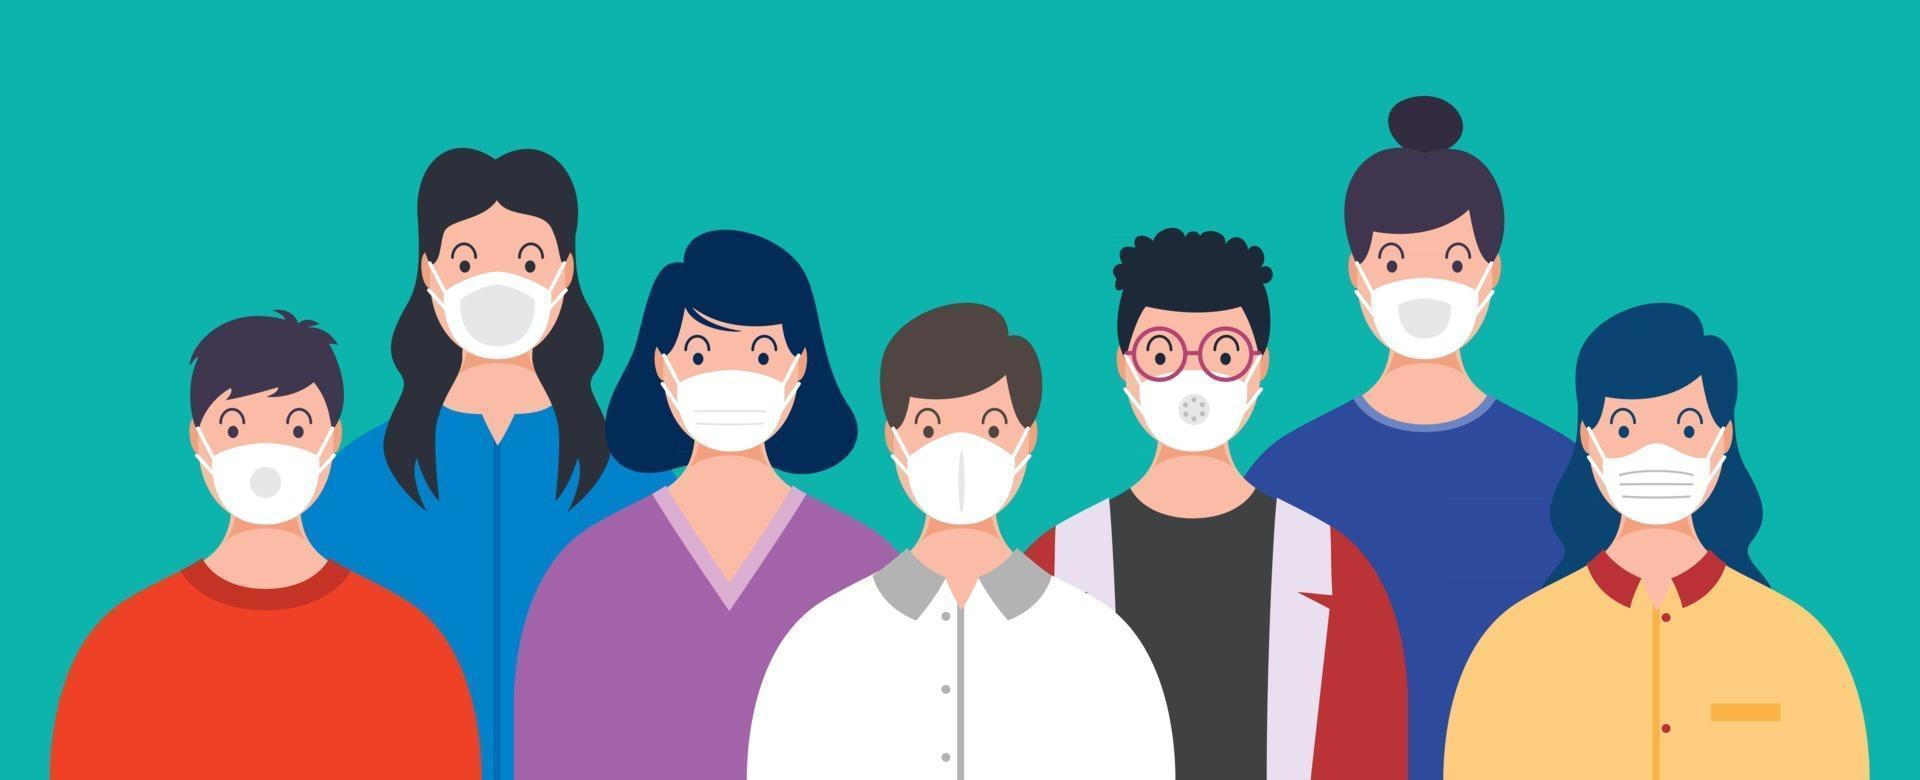 Health Concept Of People Wearing Medical Masks vector